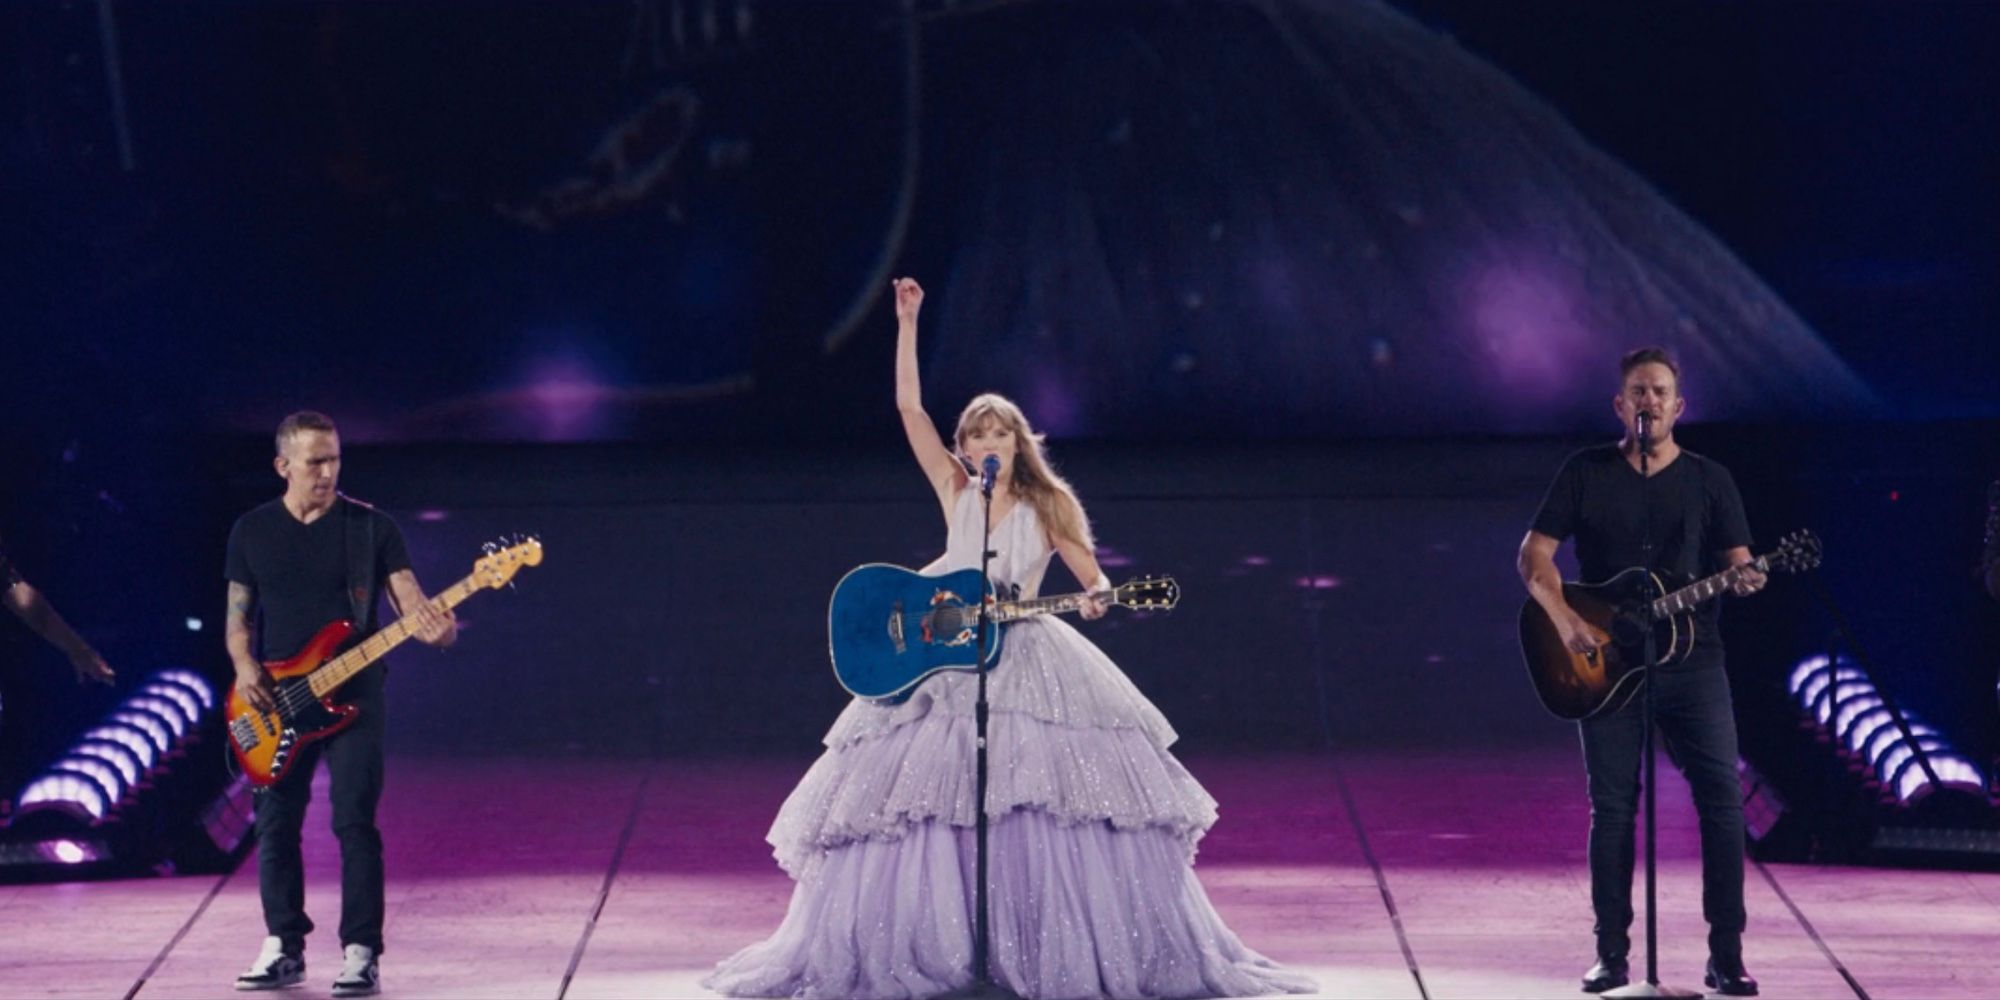 Taylor Swift and her band perform 